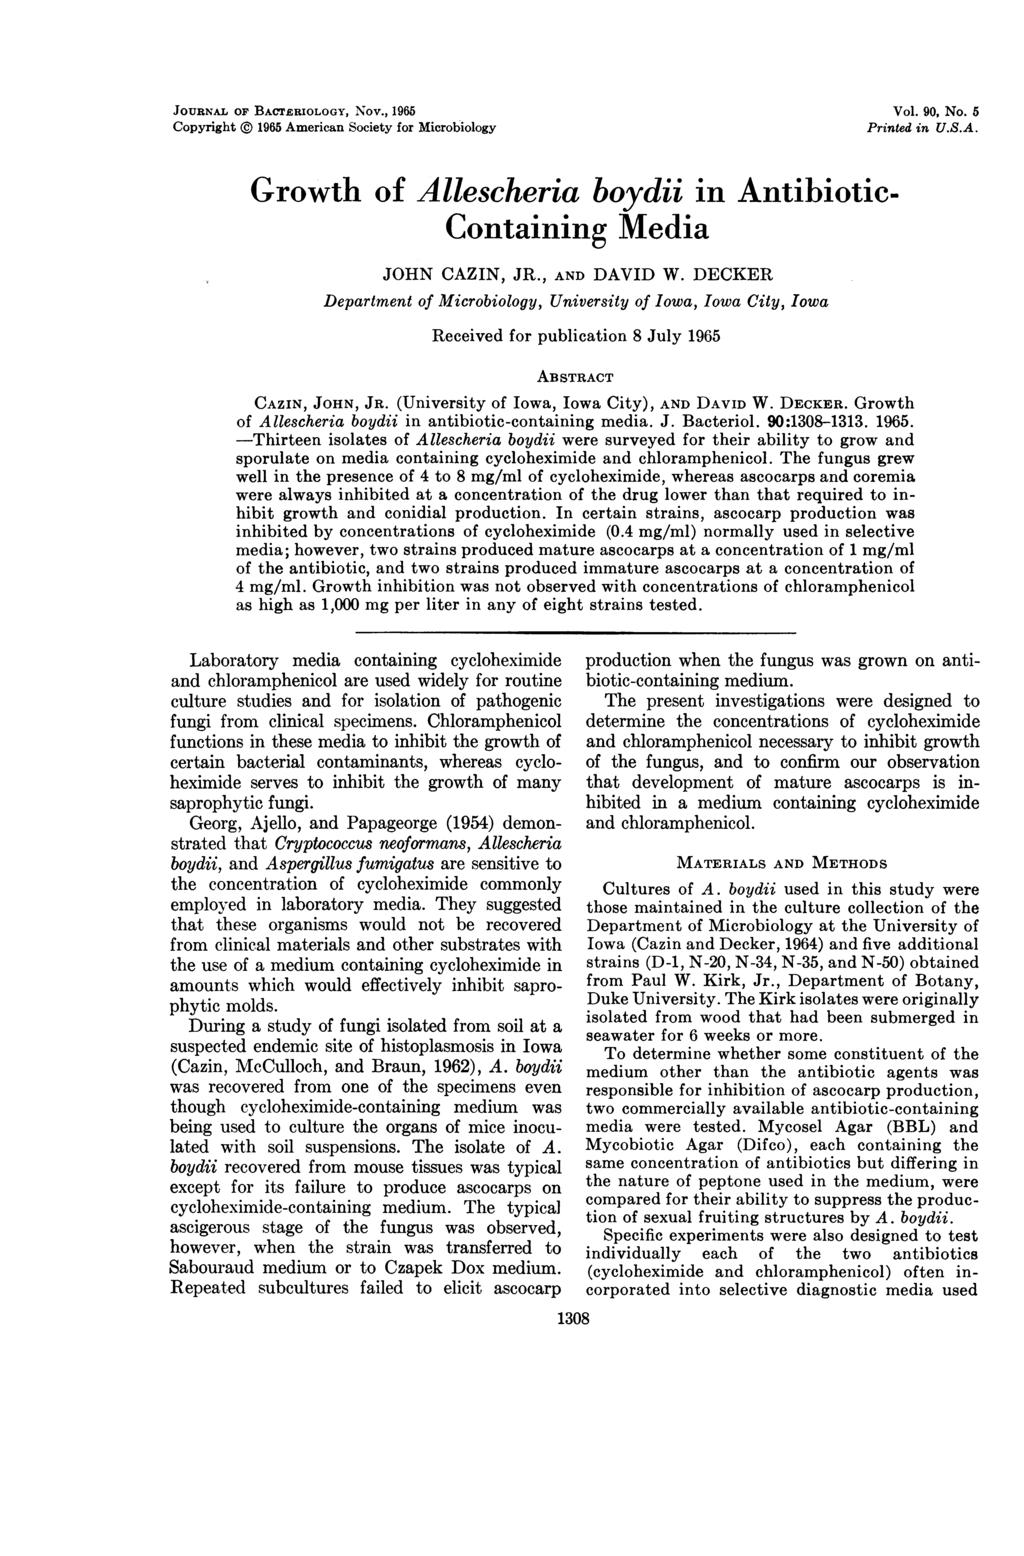 JOURNAL OF BATERIOLOGY, Nov., 1965 opyright 1965 American Society for Microbiology Vol. 90, No. 5 Printed in U.S.A. Growth of Allescheria boydii in Antibiotic- ontaining Media JOHN AZIN, JR.